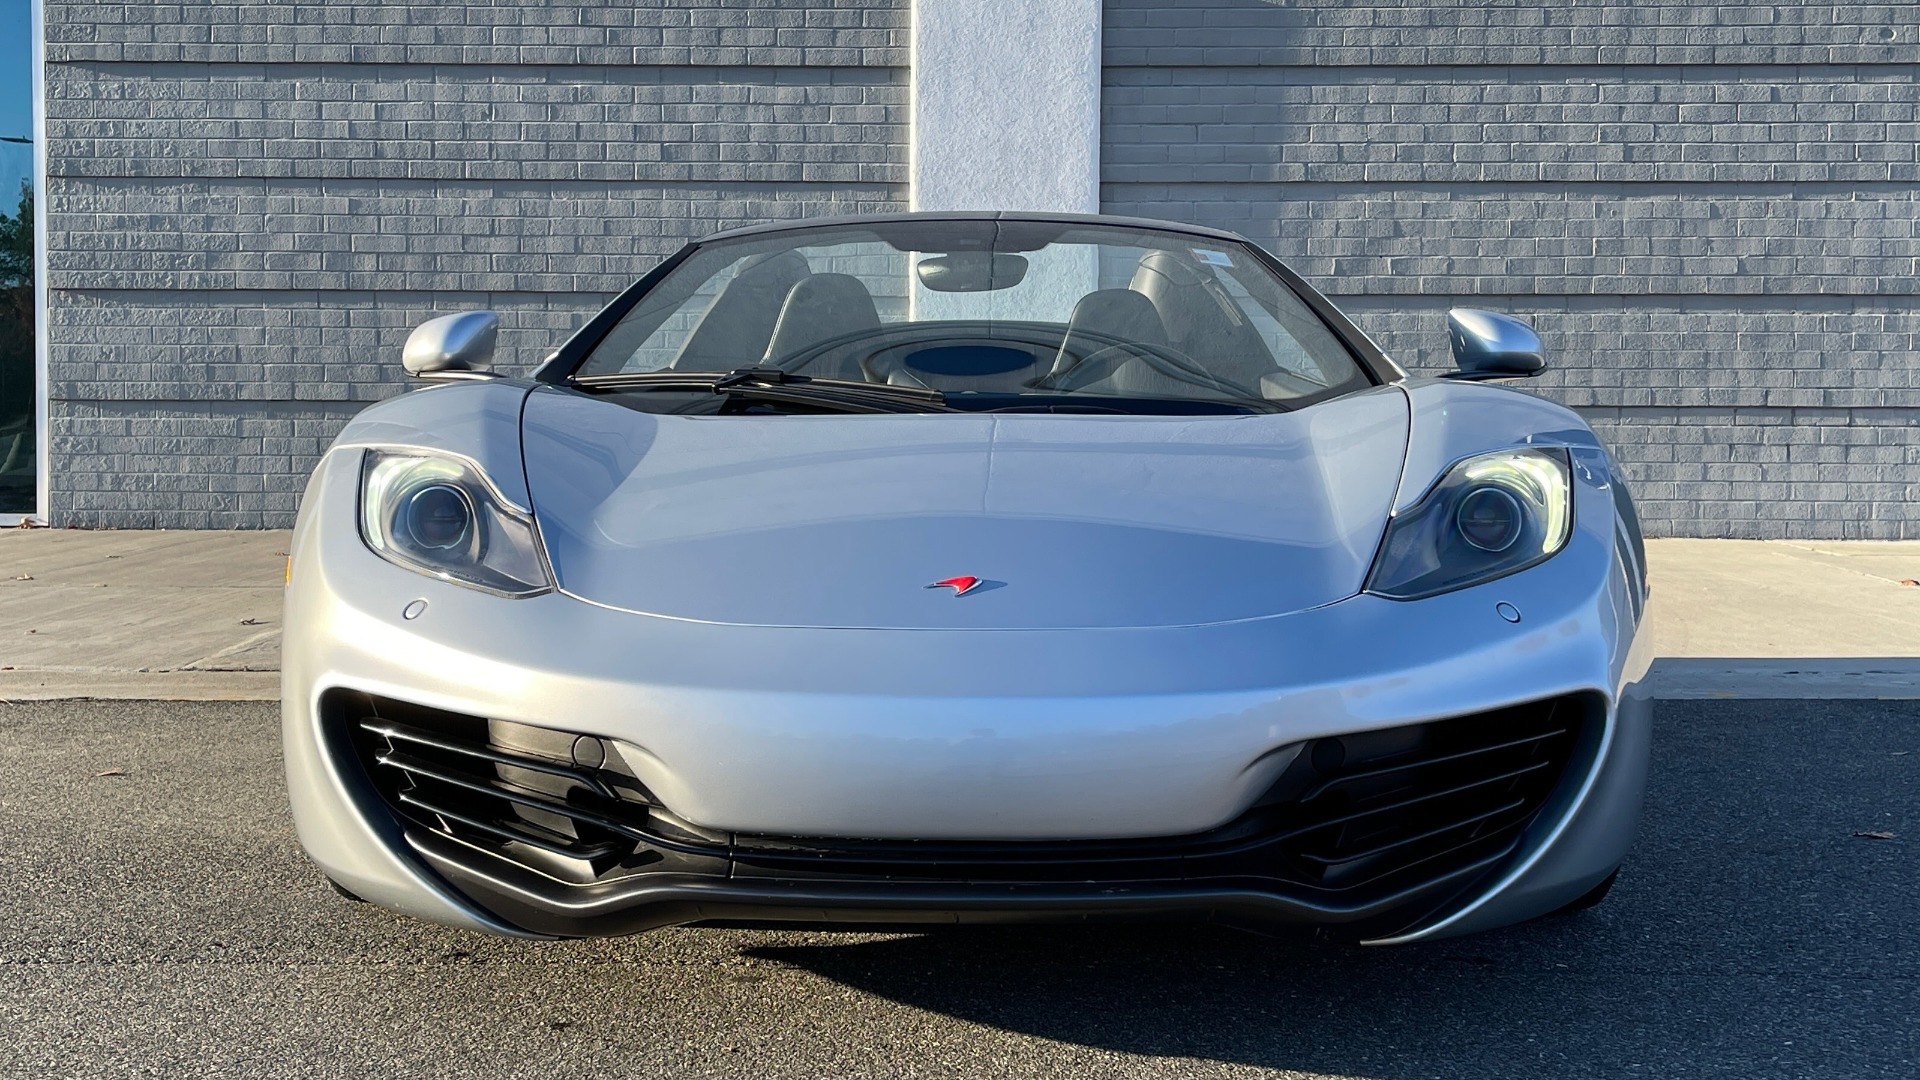 Used 2013 McLaren MP4 12C SPIDER 3.8L TURBO V8 616HP / 7AM TRANS / NAV / MERIDIAN SND for sale $145,000 at Formula Imports in Charlotte NC 28227 9